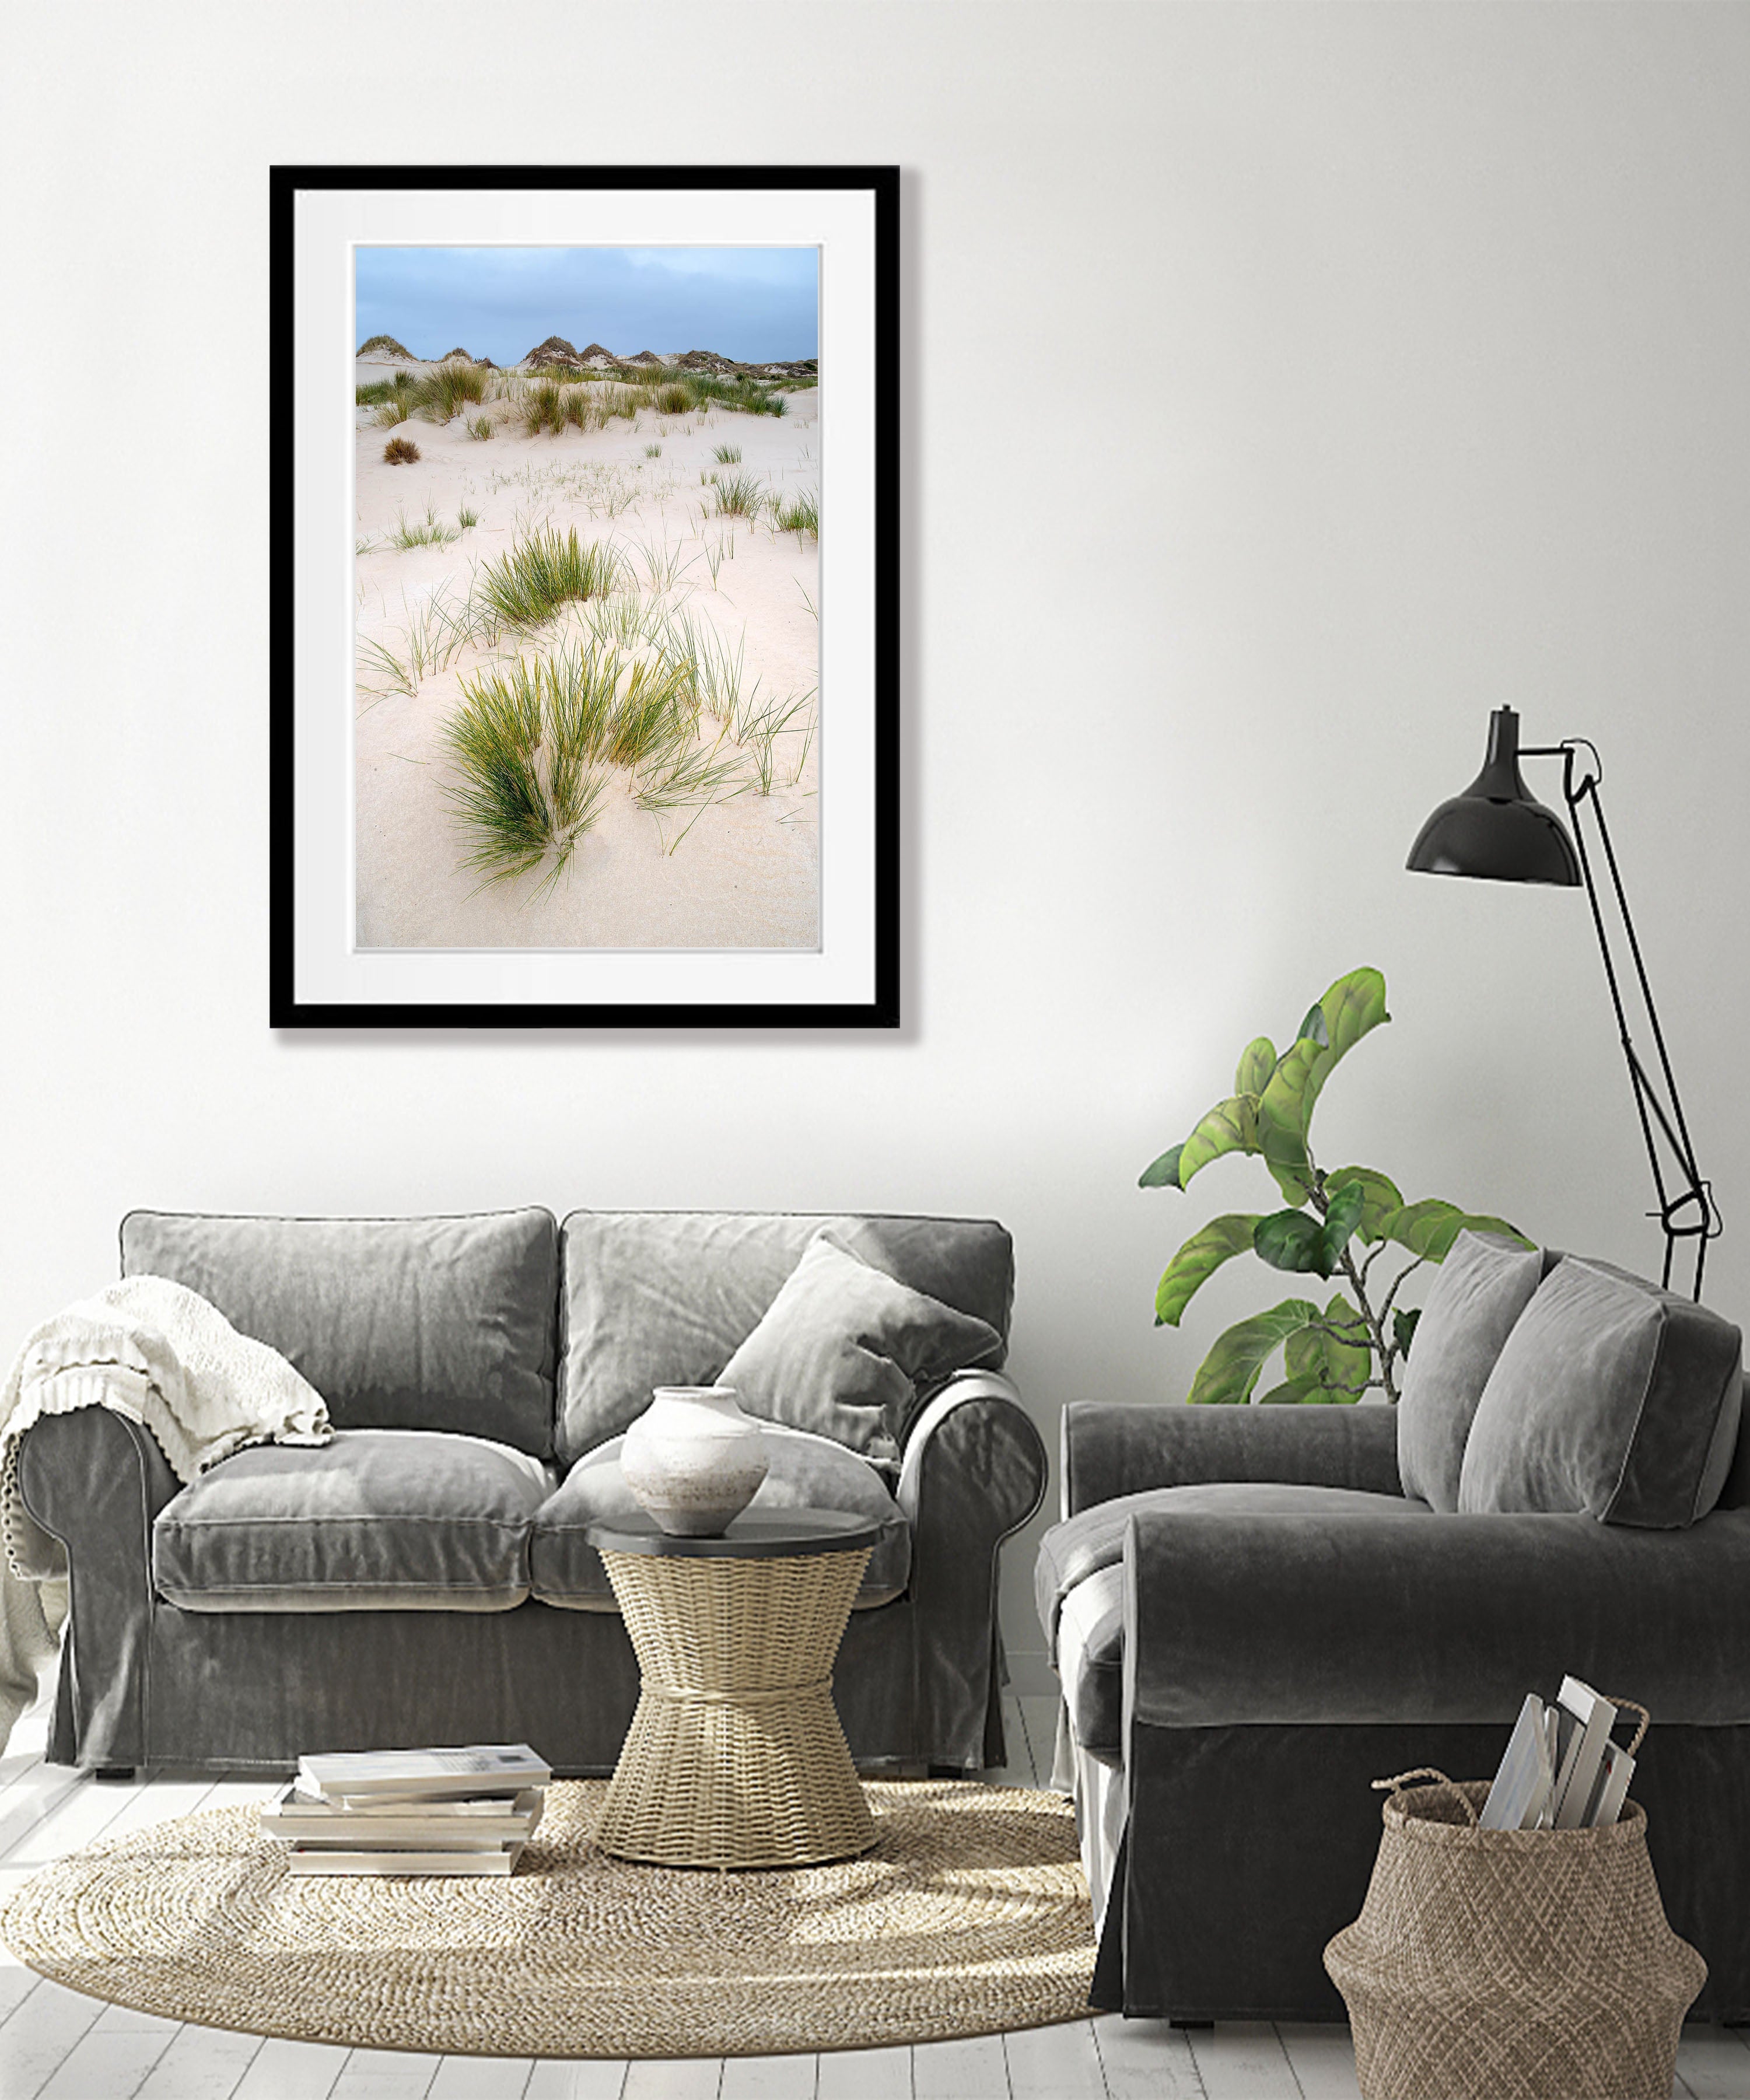 Foredune grass at the Bay of Fires, Tasmania